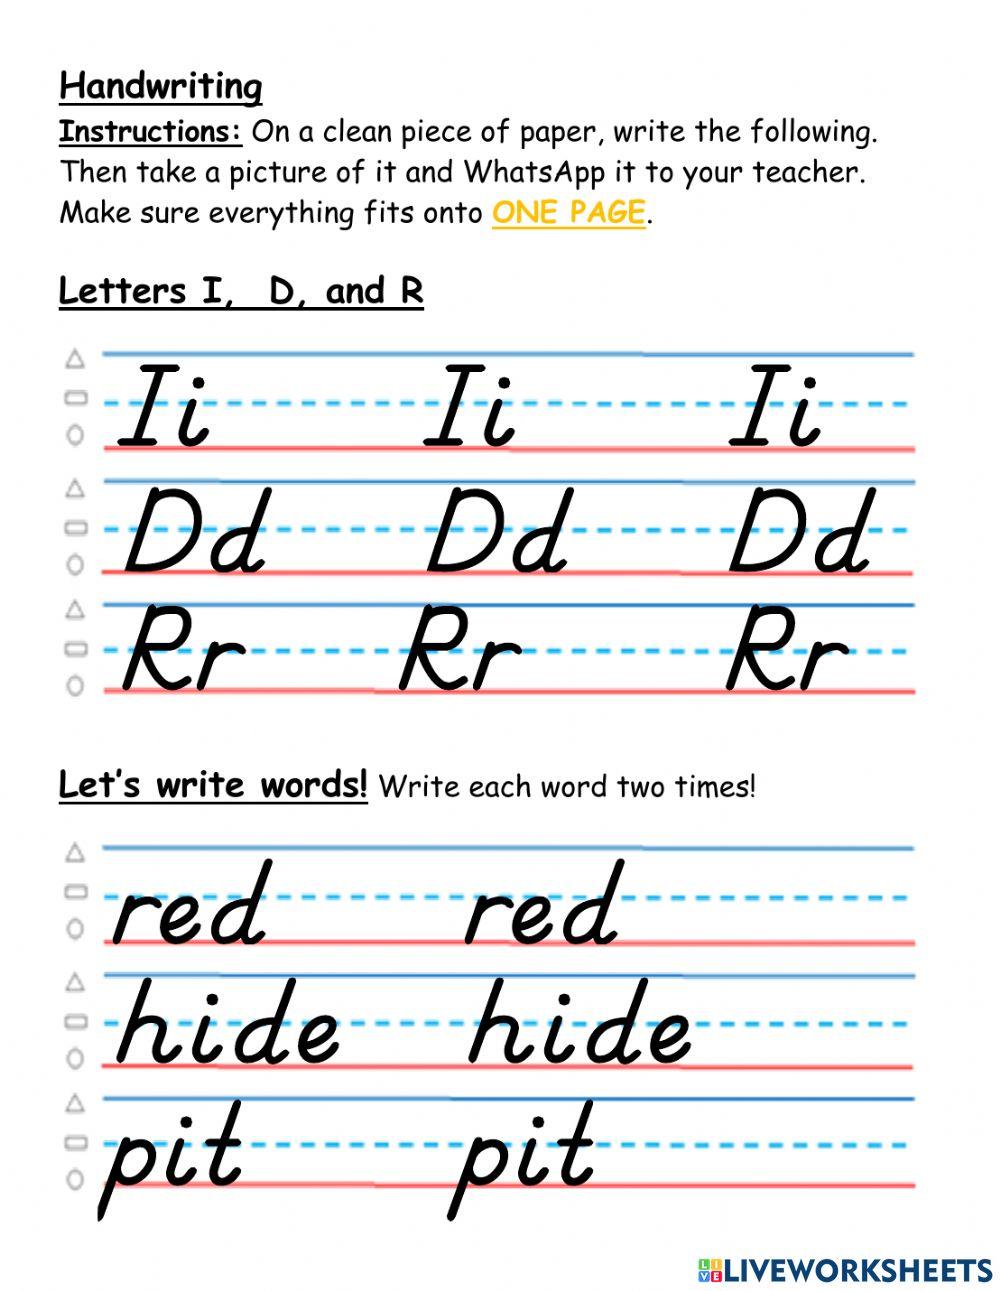 Writing Letters I, D, and R